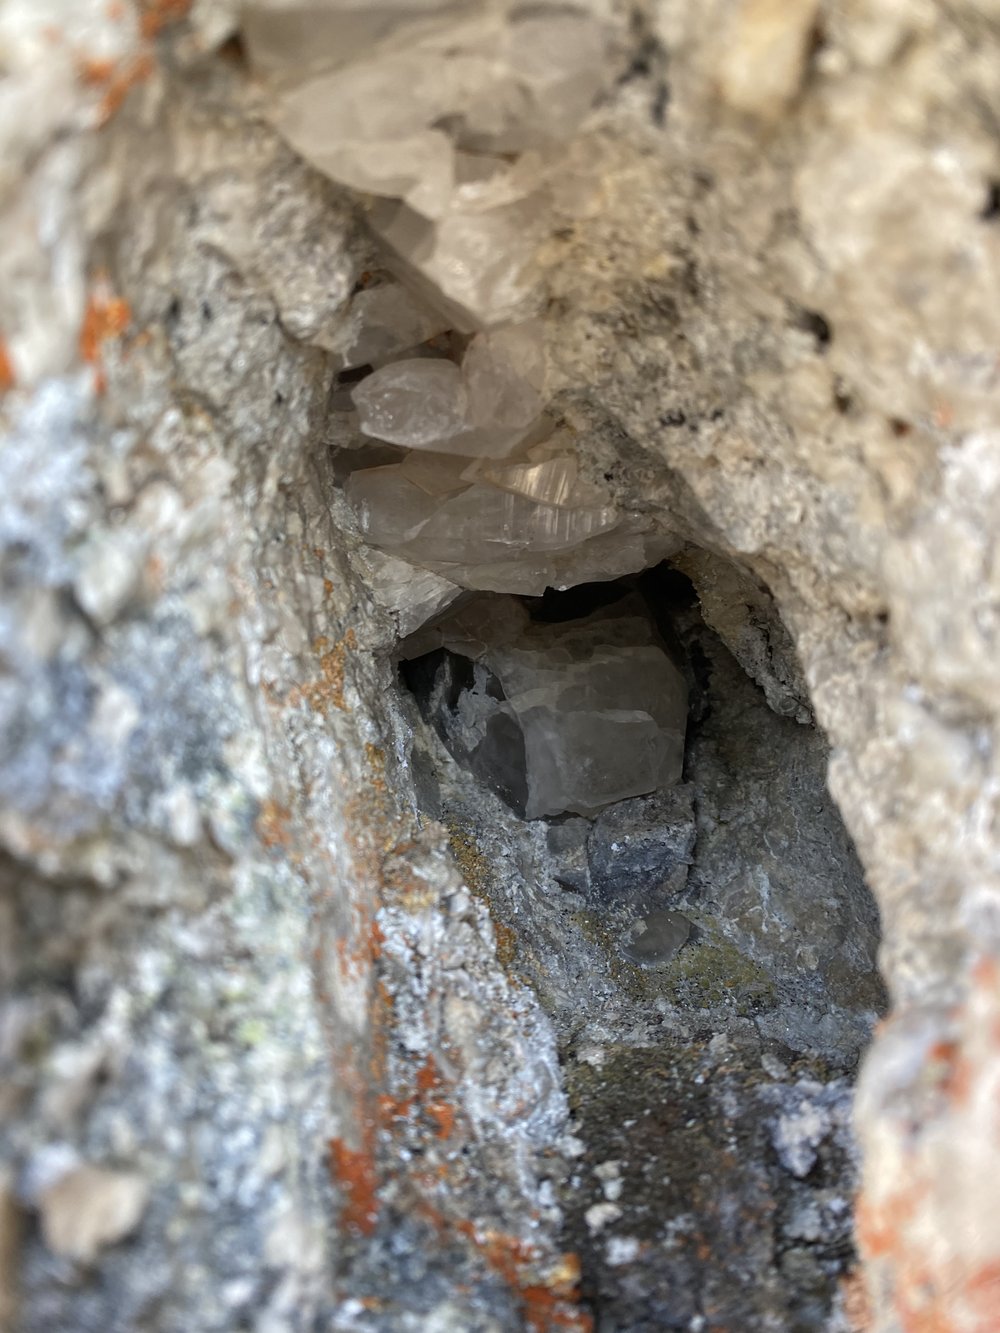 A close-up view of the pocket full of crystals that became the namesake of the route.